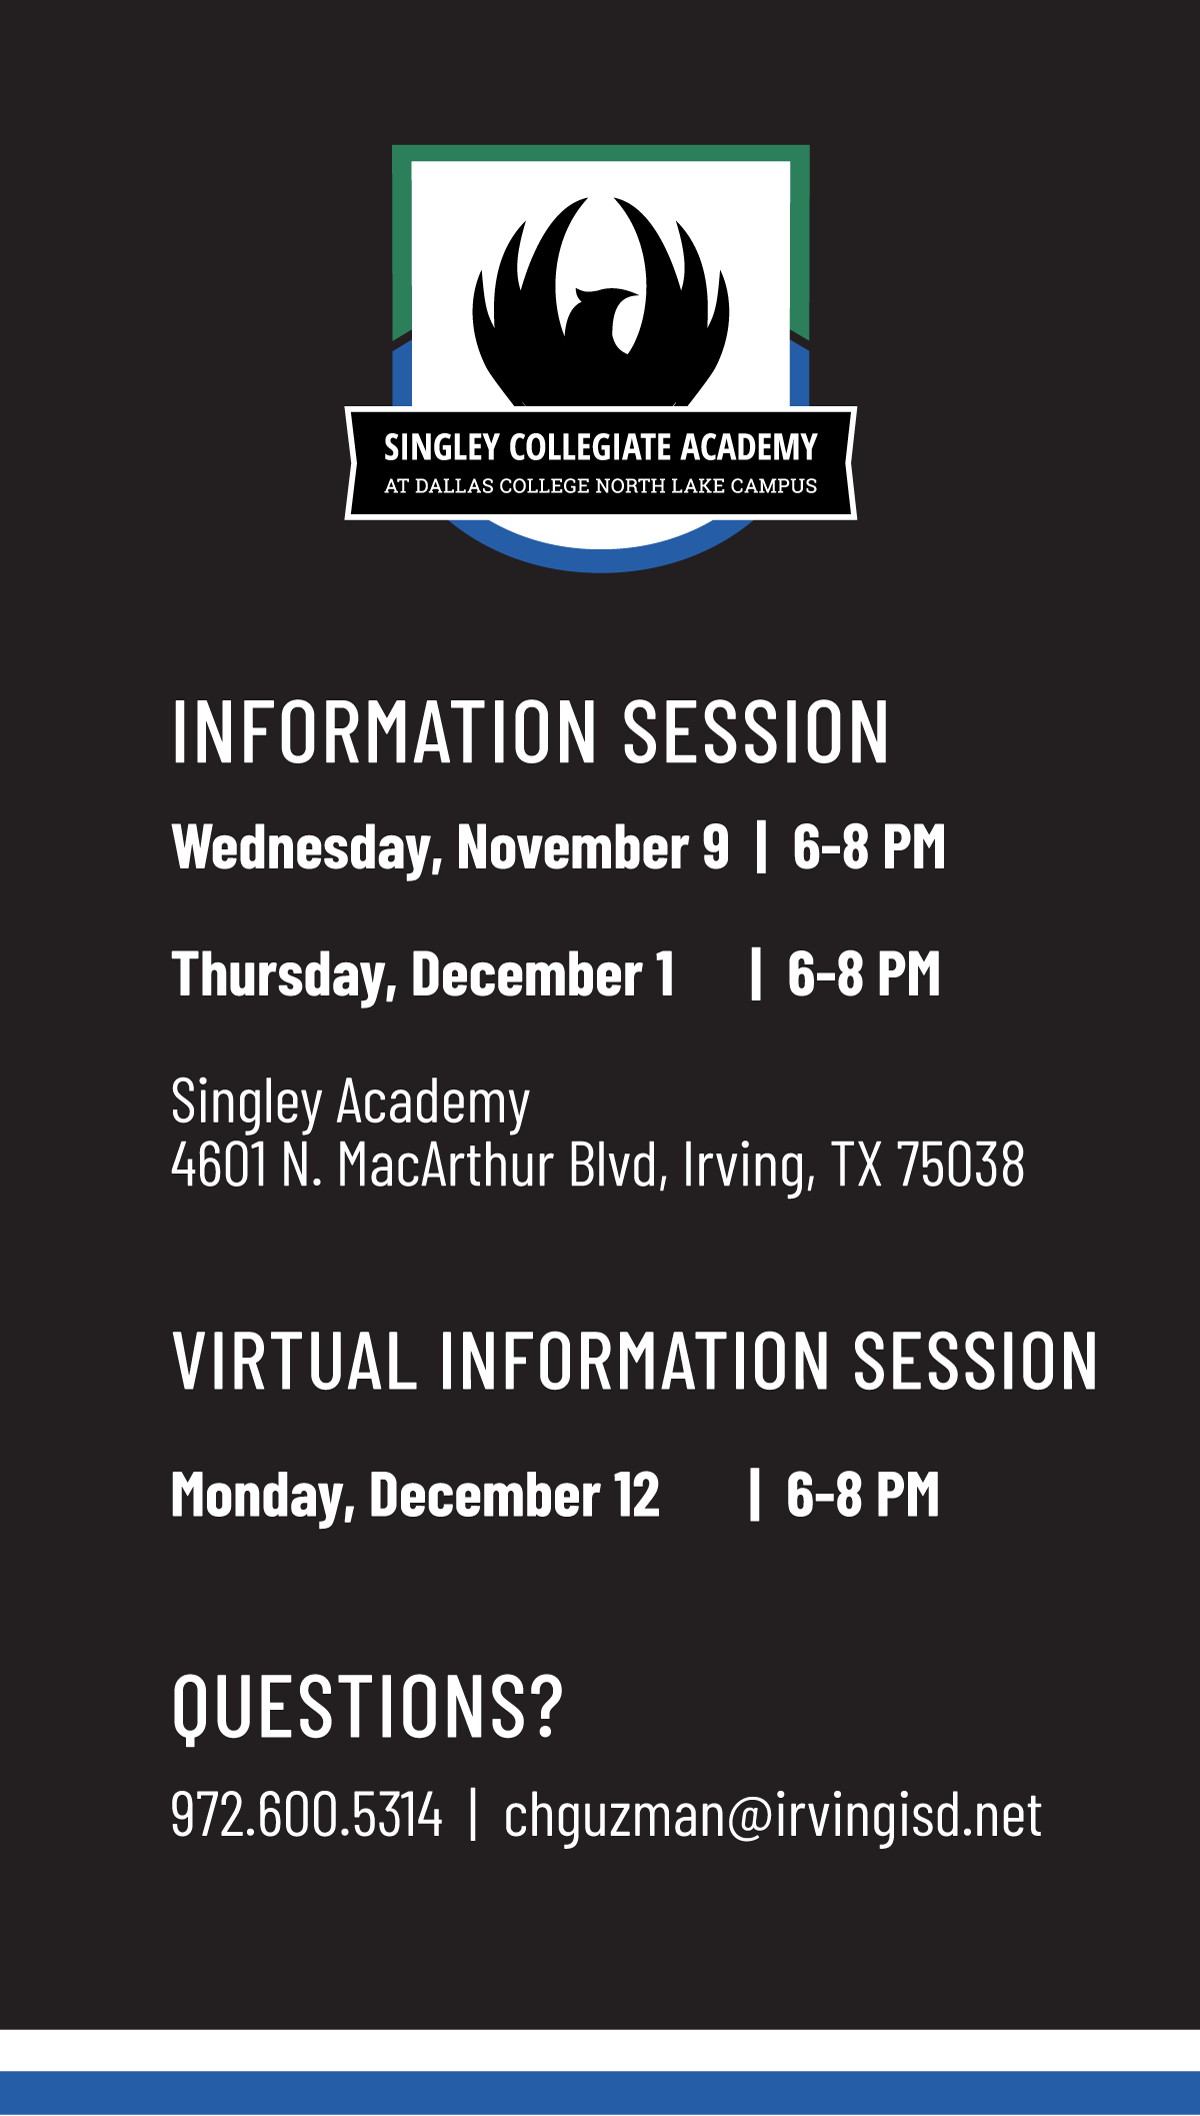 Singley Collegiate Academy Information Session